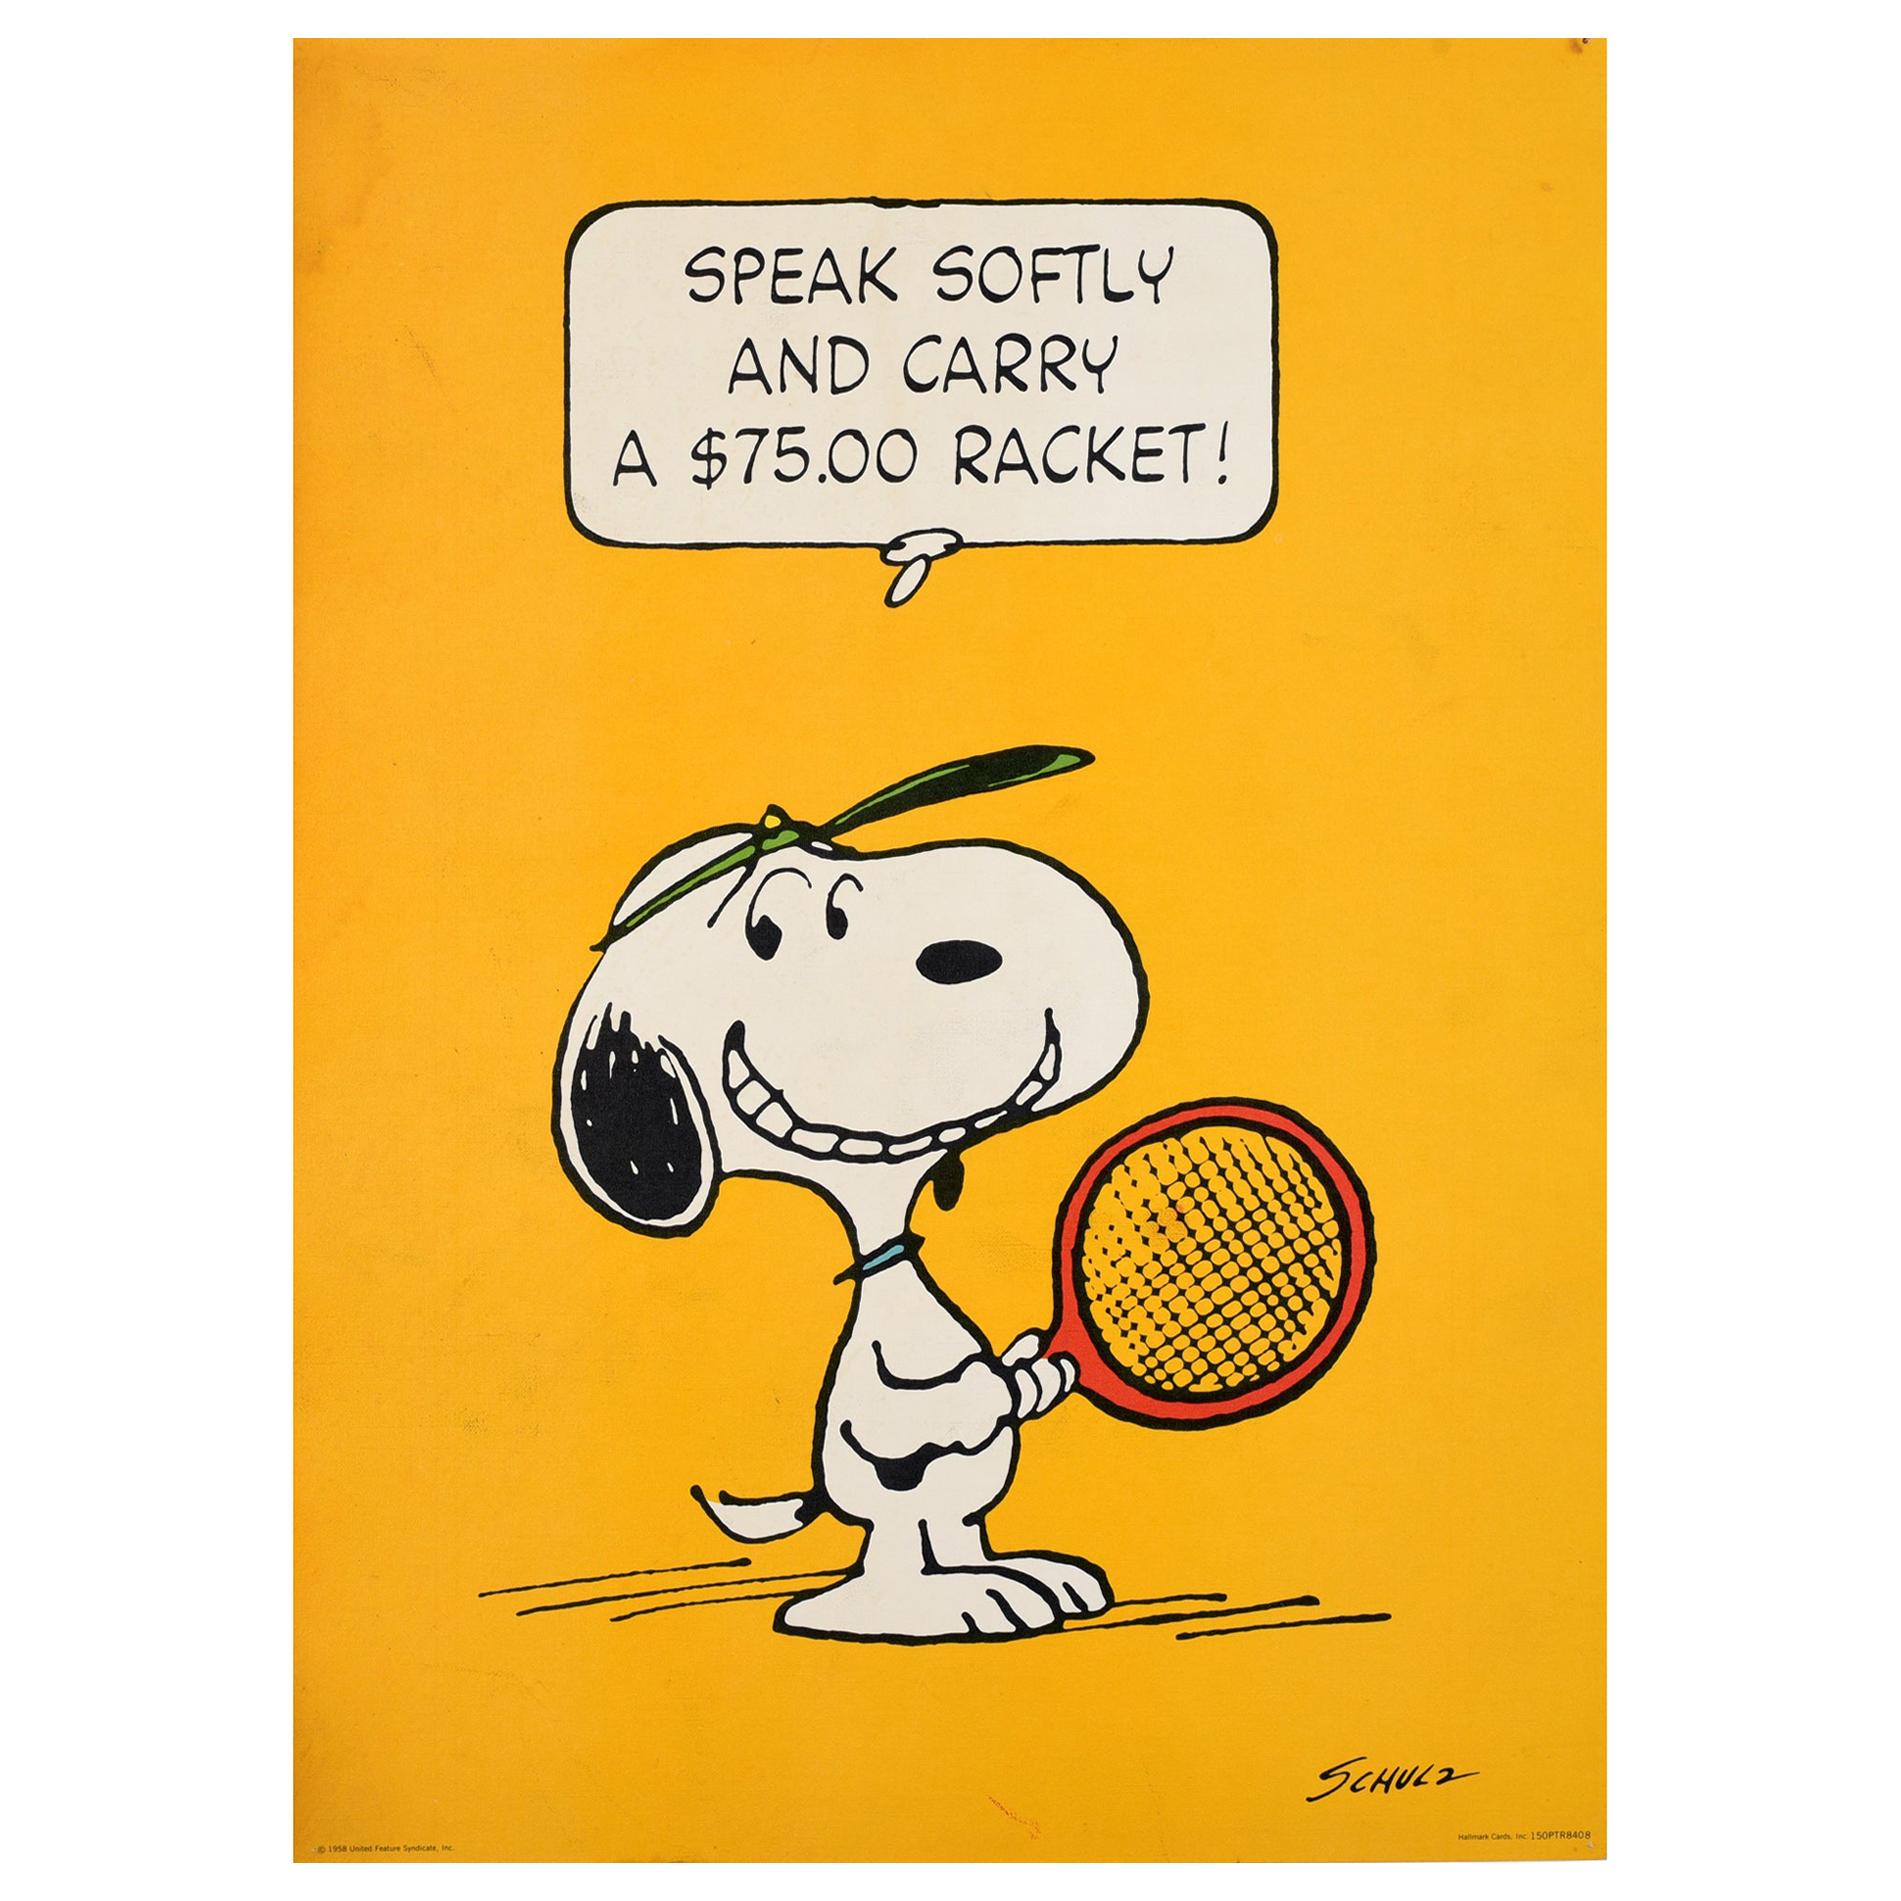 Original Vintage Snoopy Poster Tennis Cartoon Speak Softy And Carry A $75 Racket